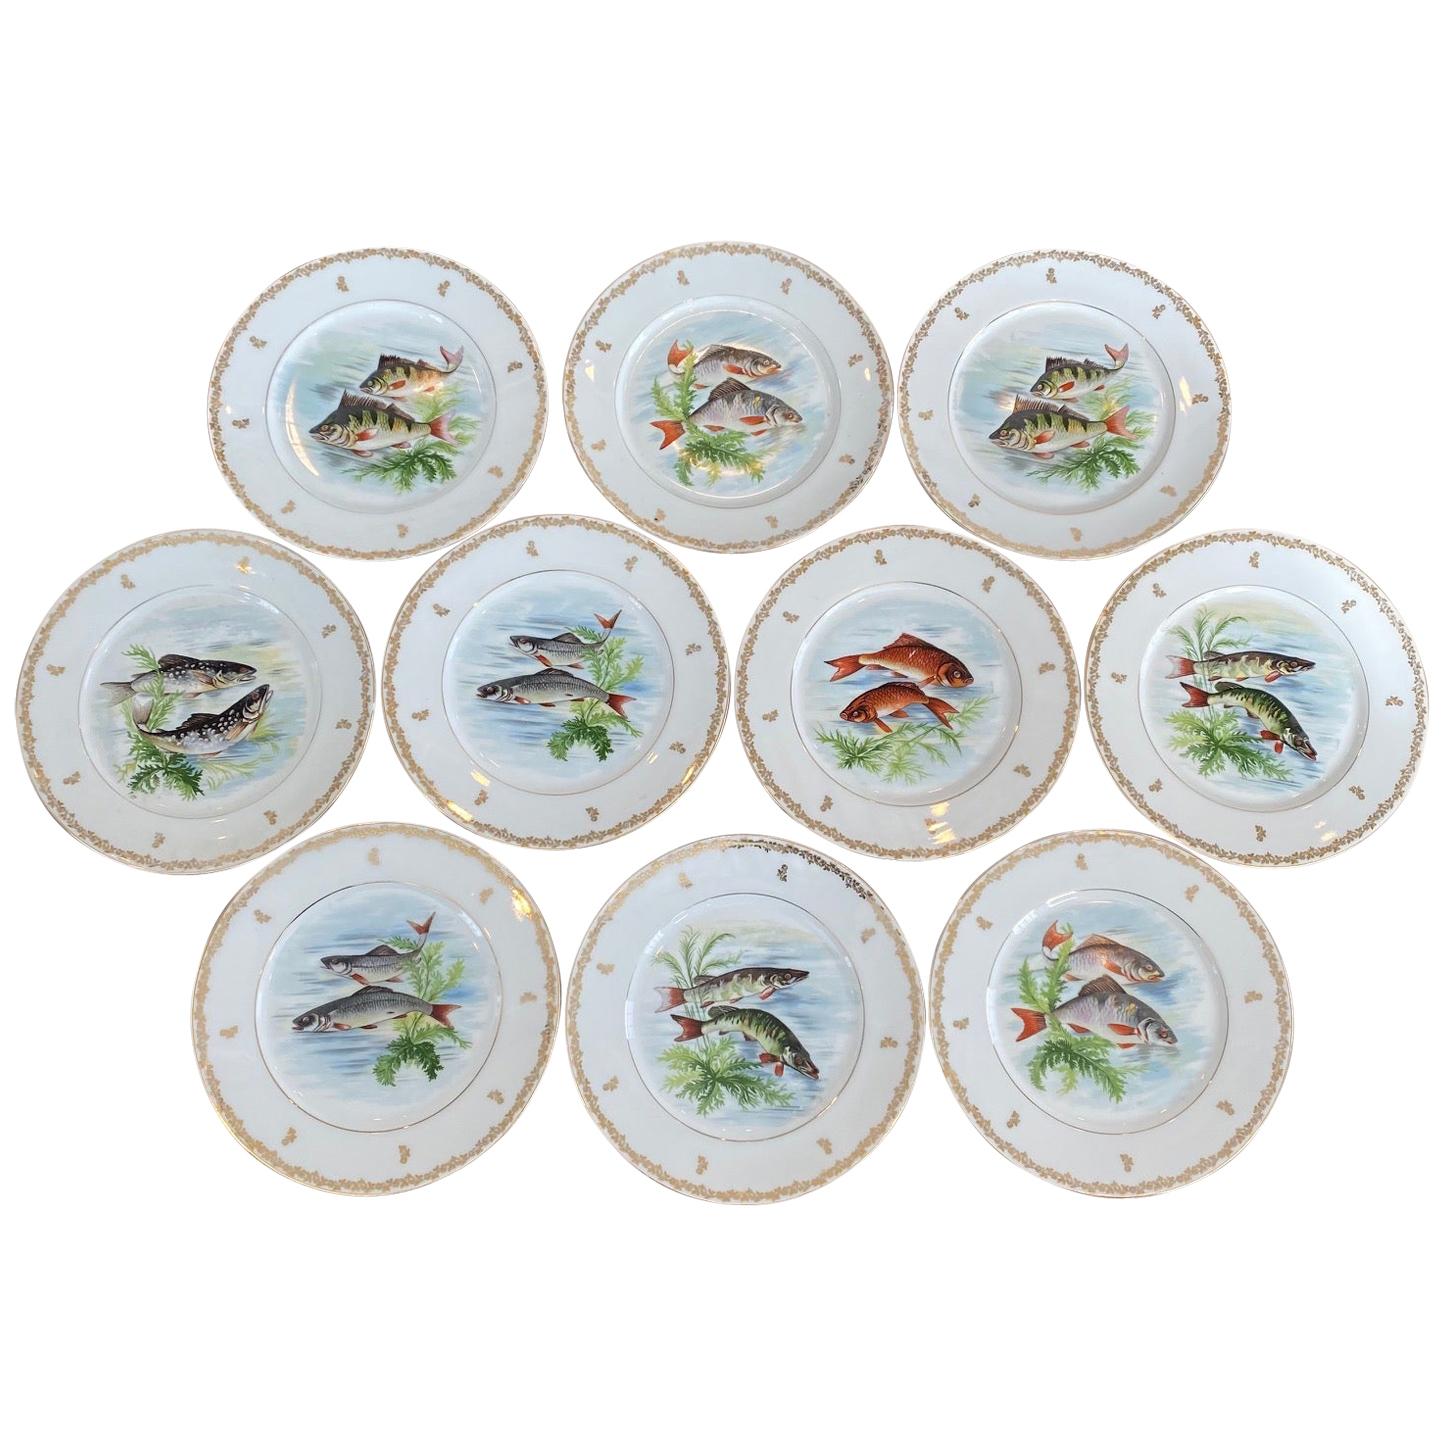 Set of Ten Hand Painted Fish Dinner Plates from Limoges